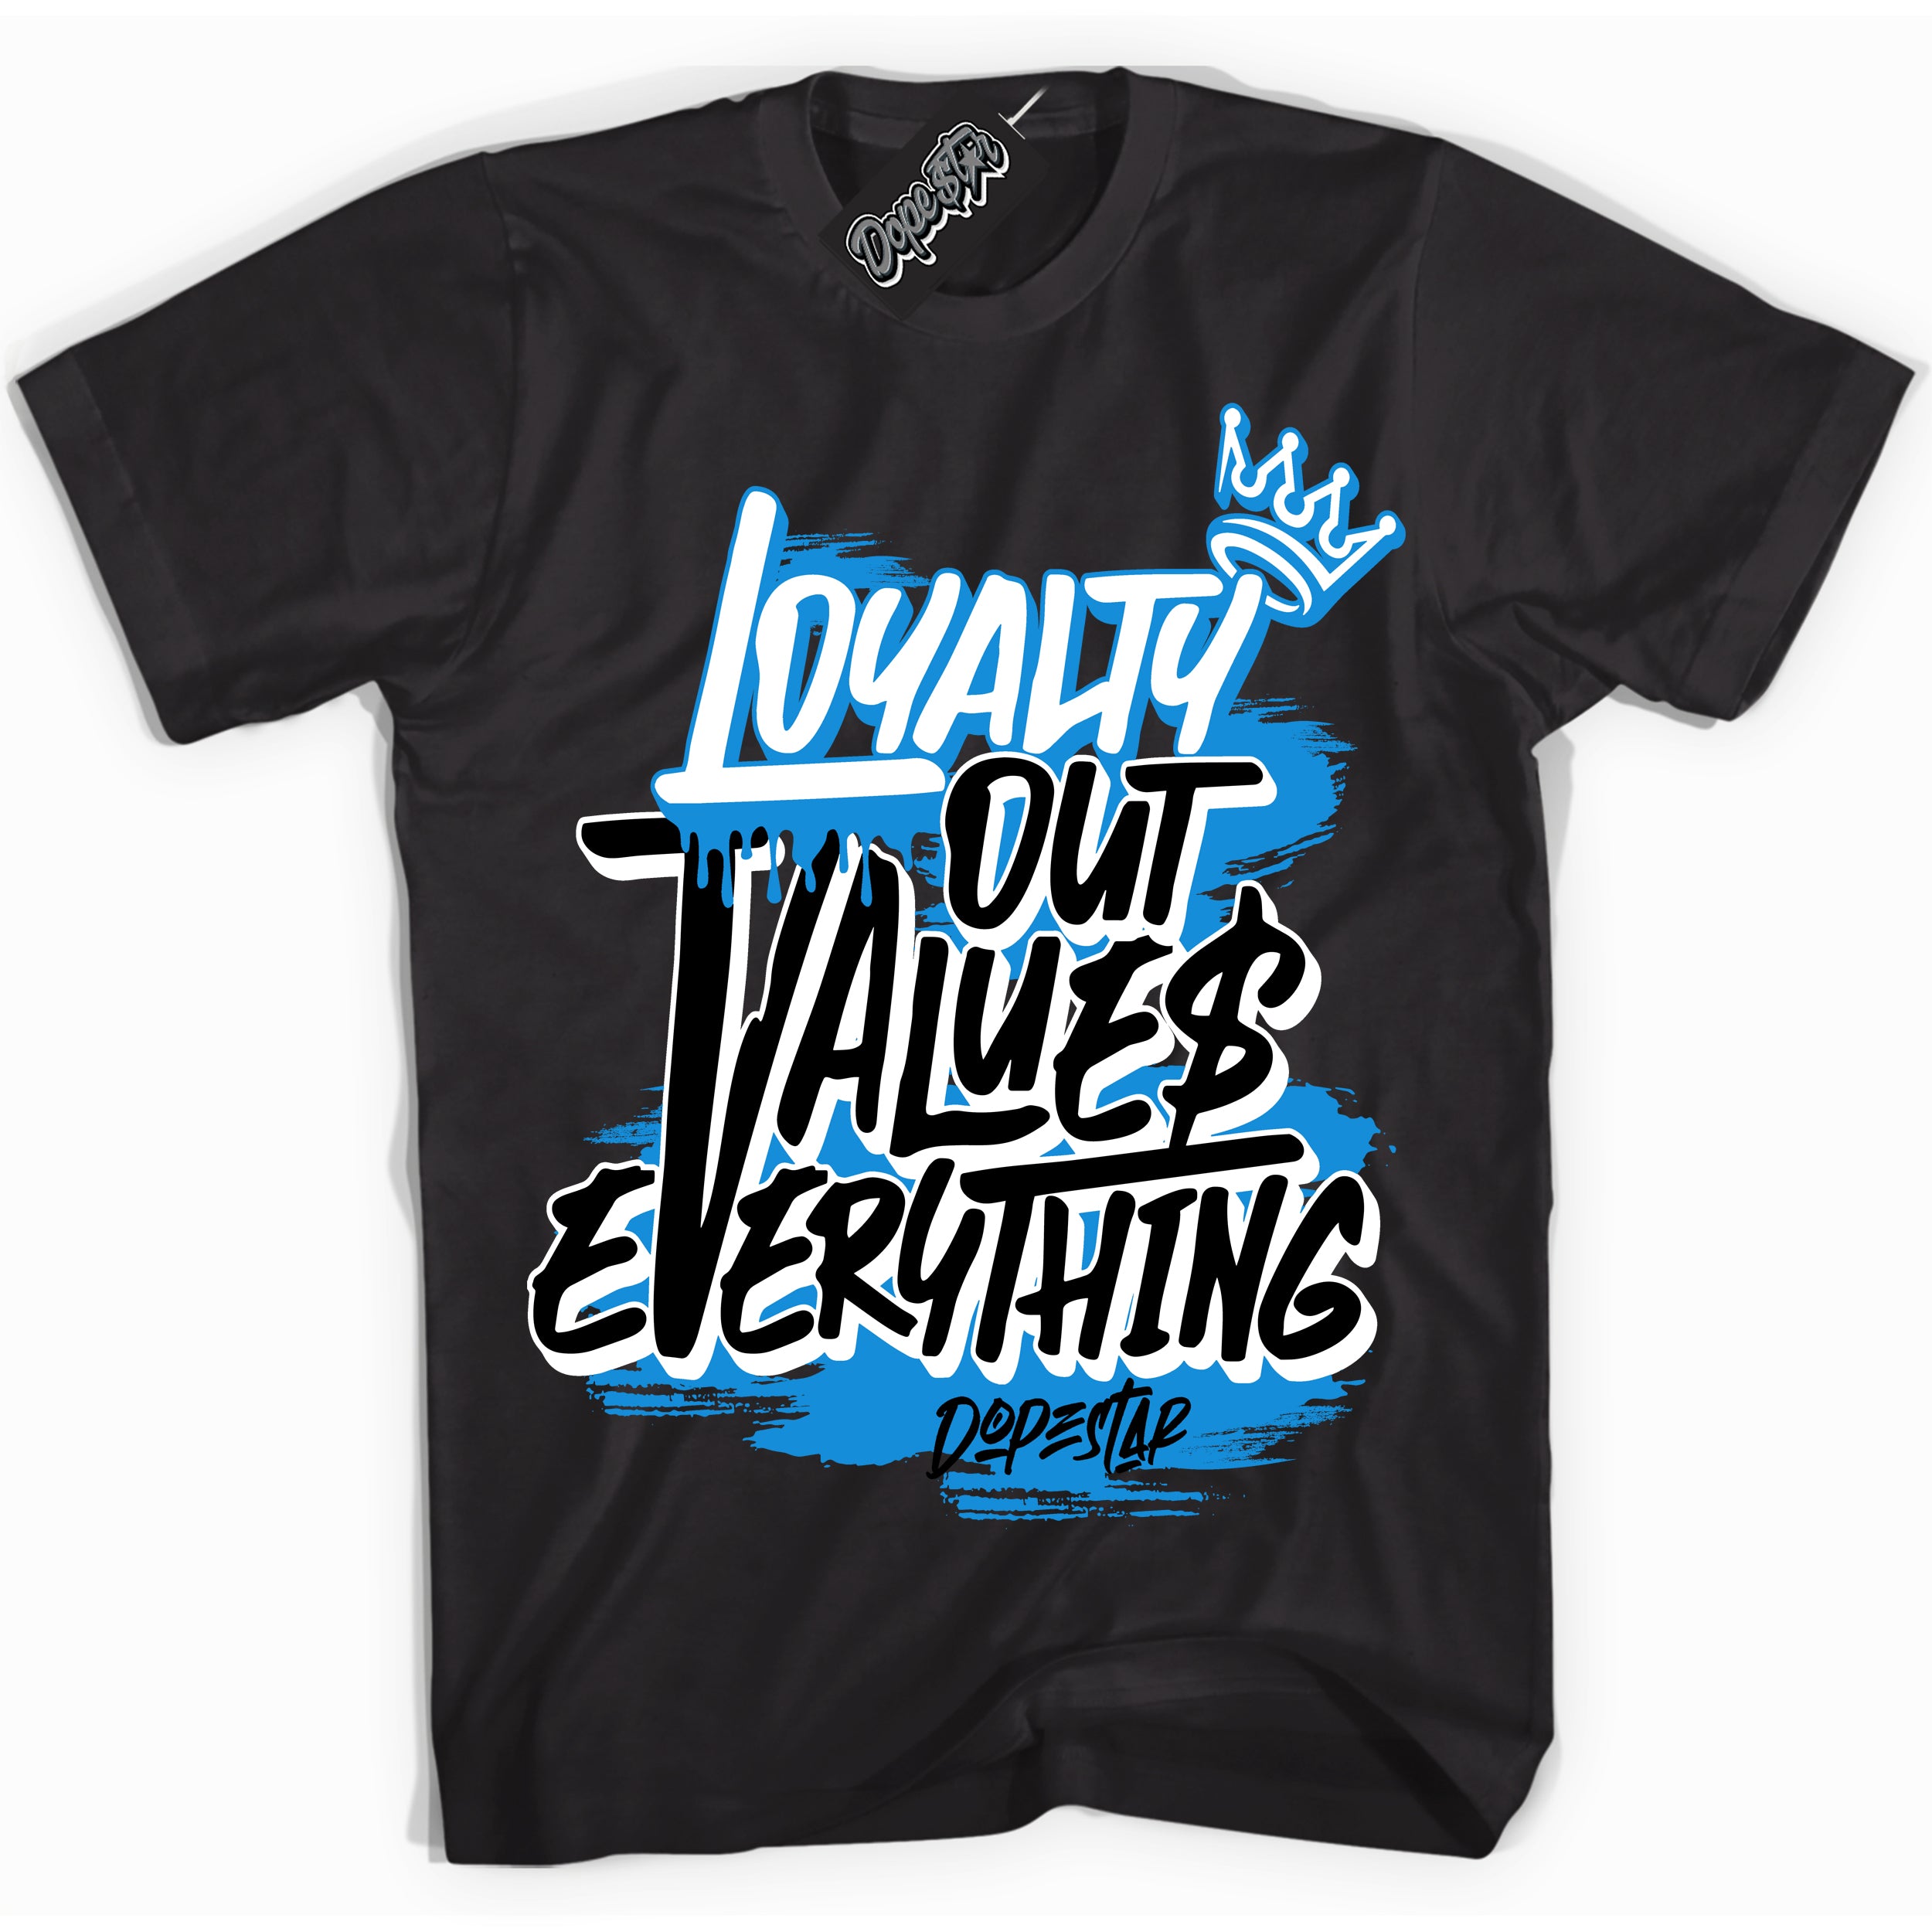 Cool Black Shirt with “ Loyalty Out Values Everything” design that perfectly matches Powder Blue 9s Sneakers.